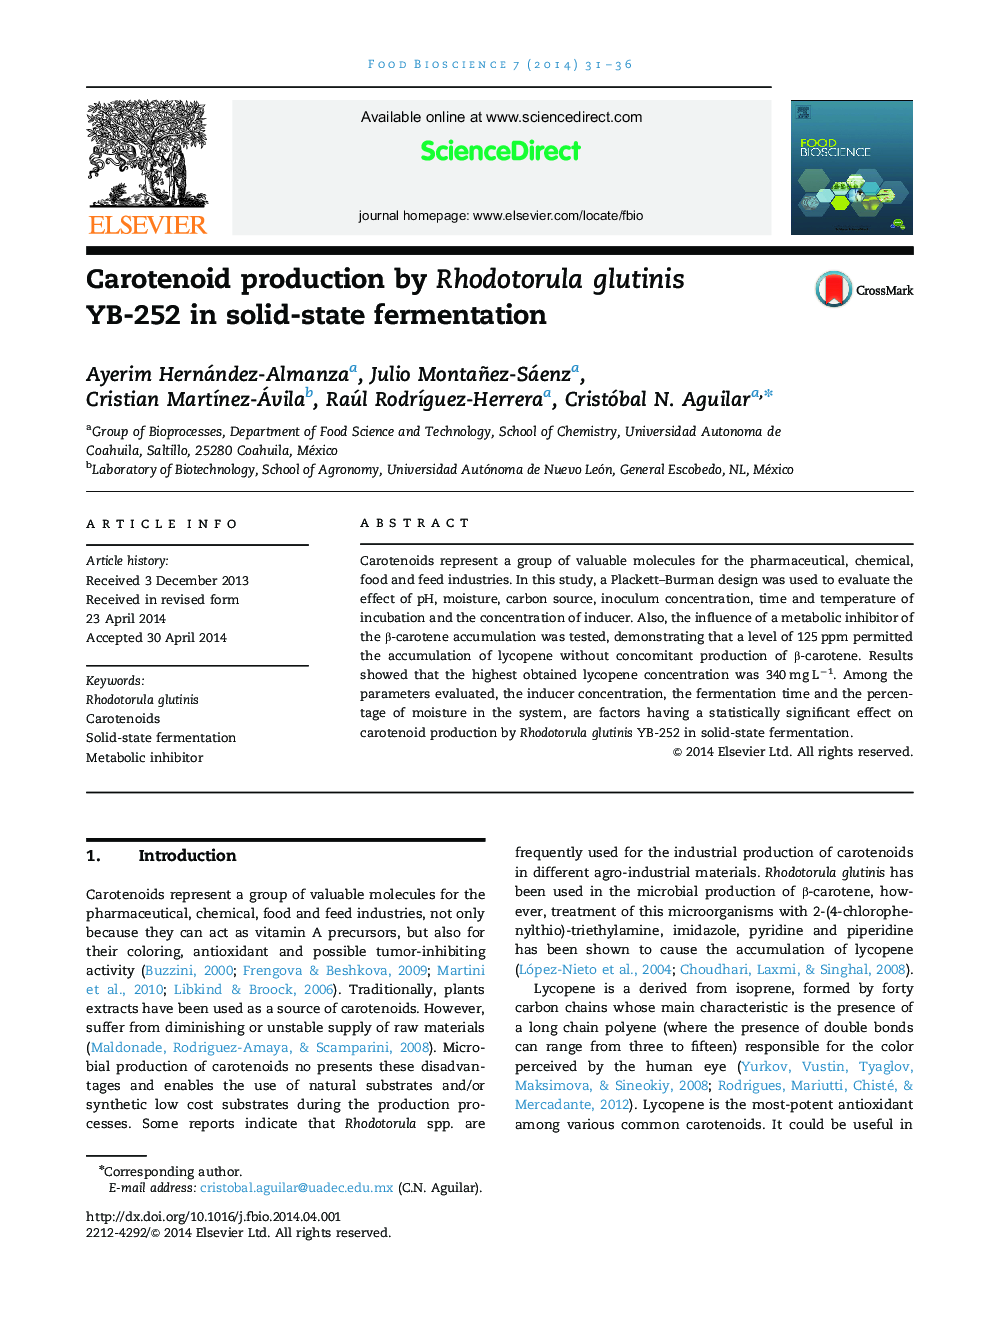 Carotenoid production by Rhodotorula glutinis YB-252 in solid-state fermentation